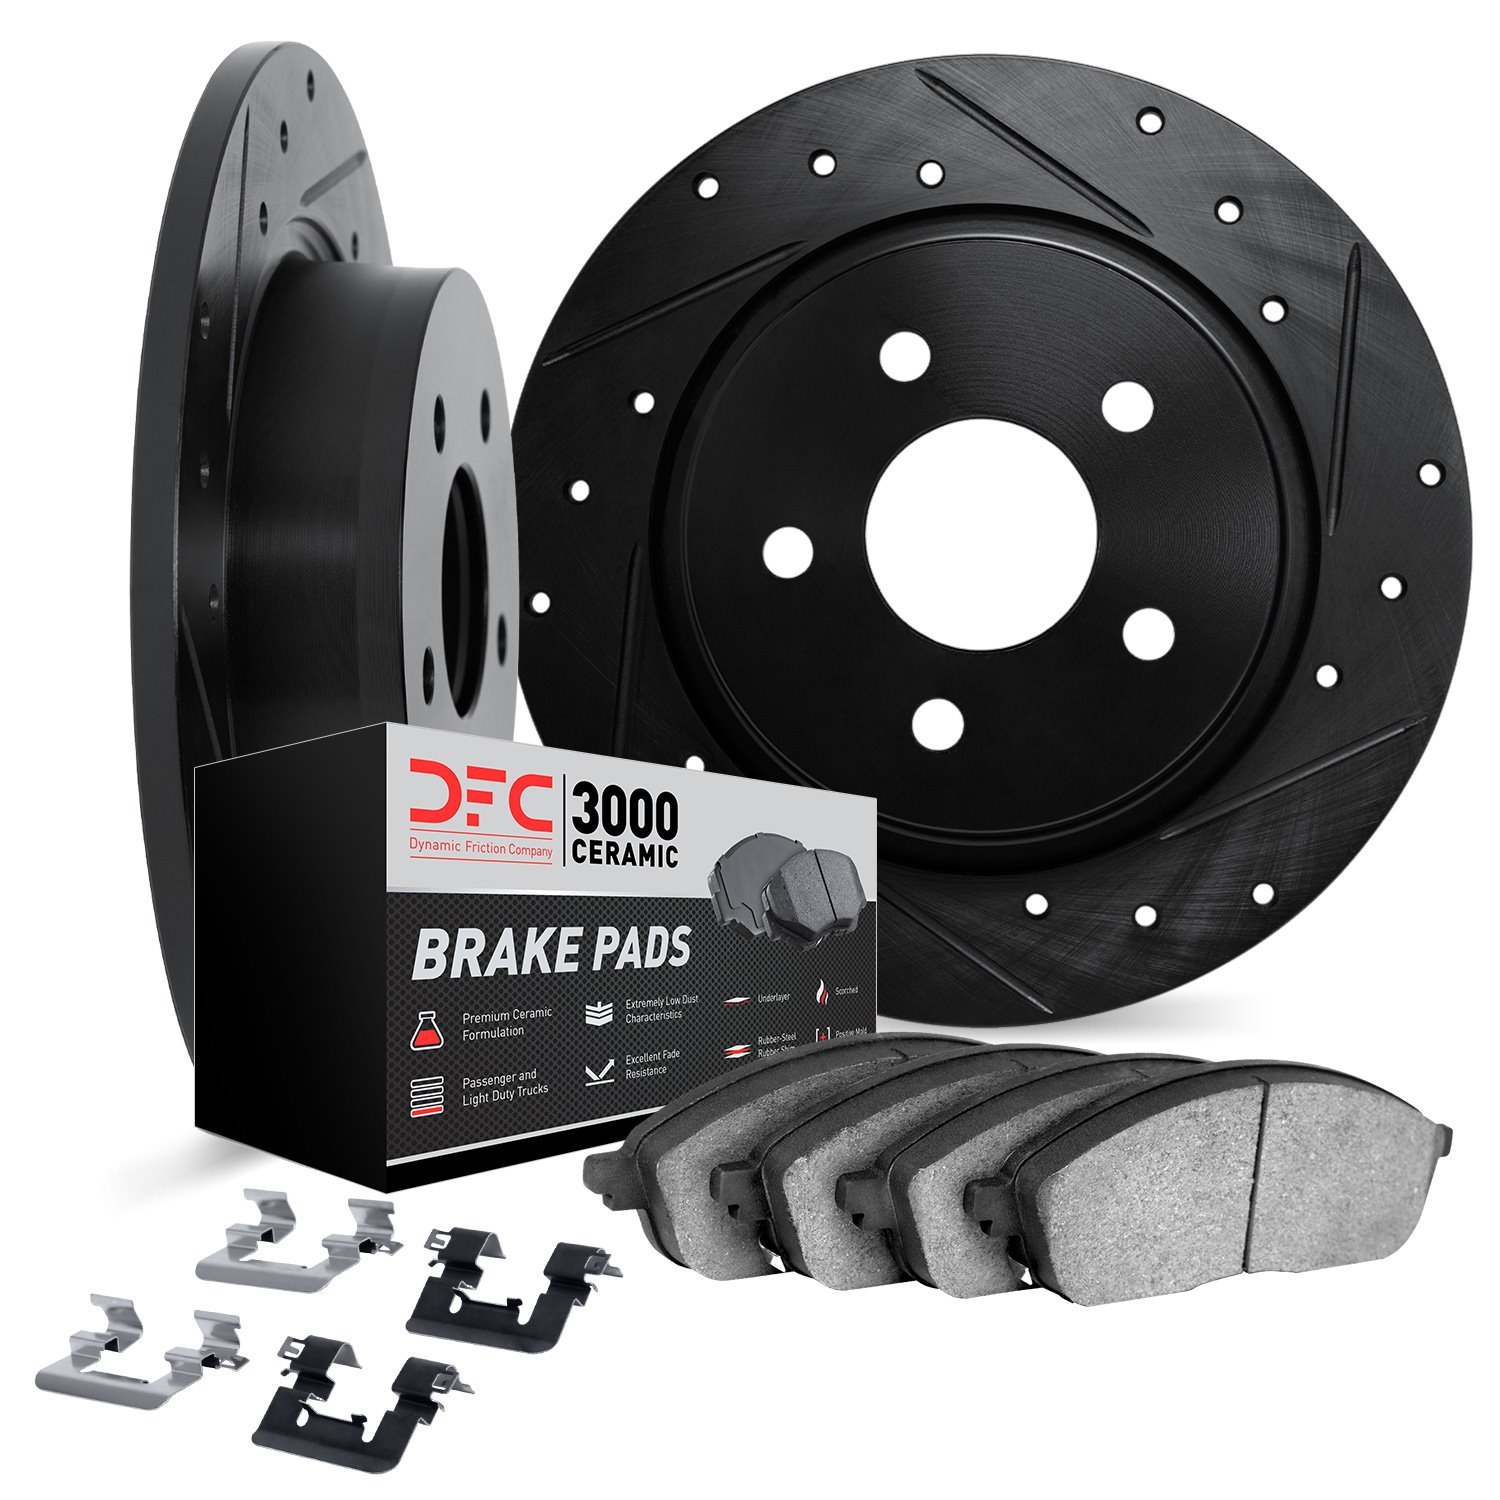 8312-55009 Drilled/Slotted Brake Rotors with 3000-Series Ceramic Brake Pads Kit & Hardware [Black], Fits Select Ford/Lincoln/Mer